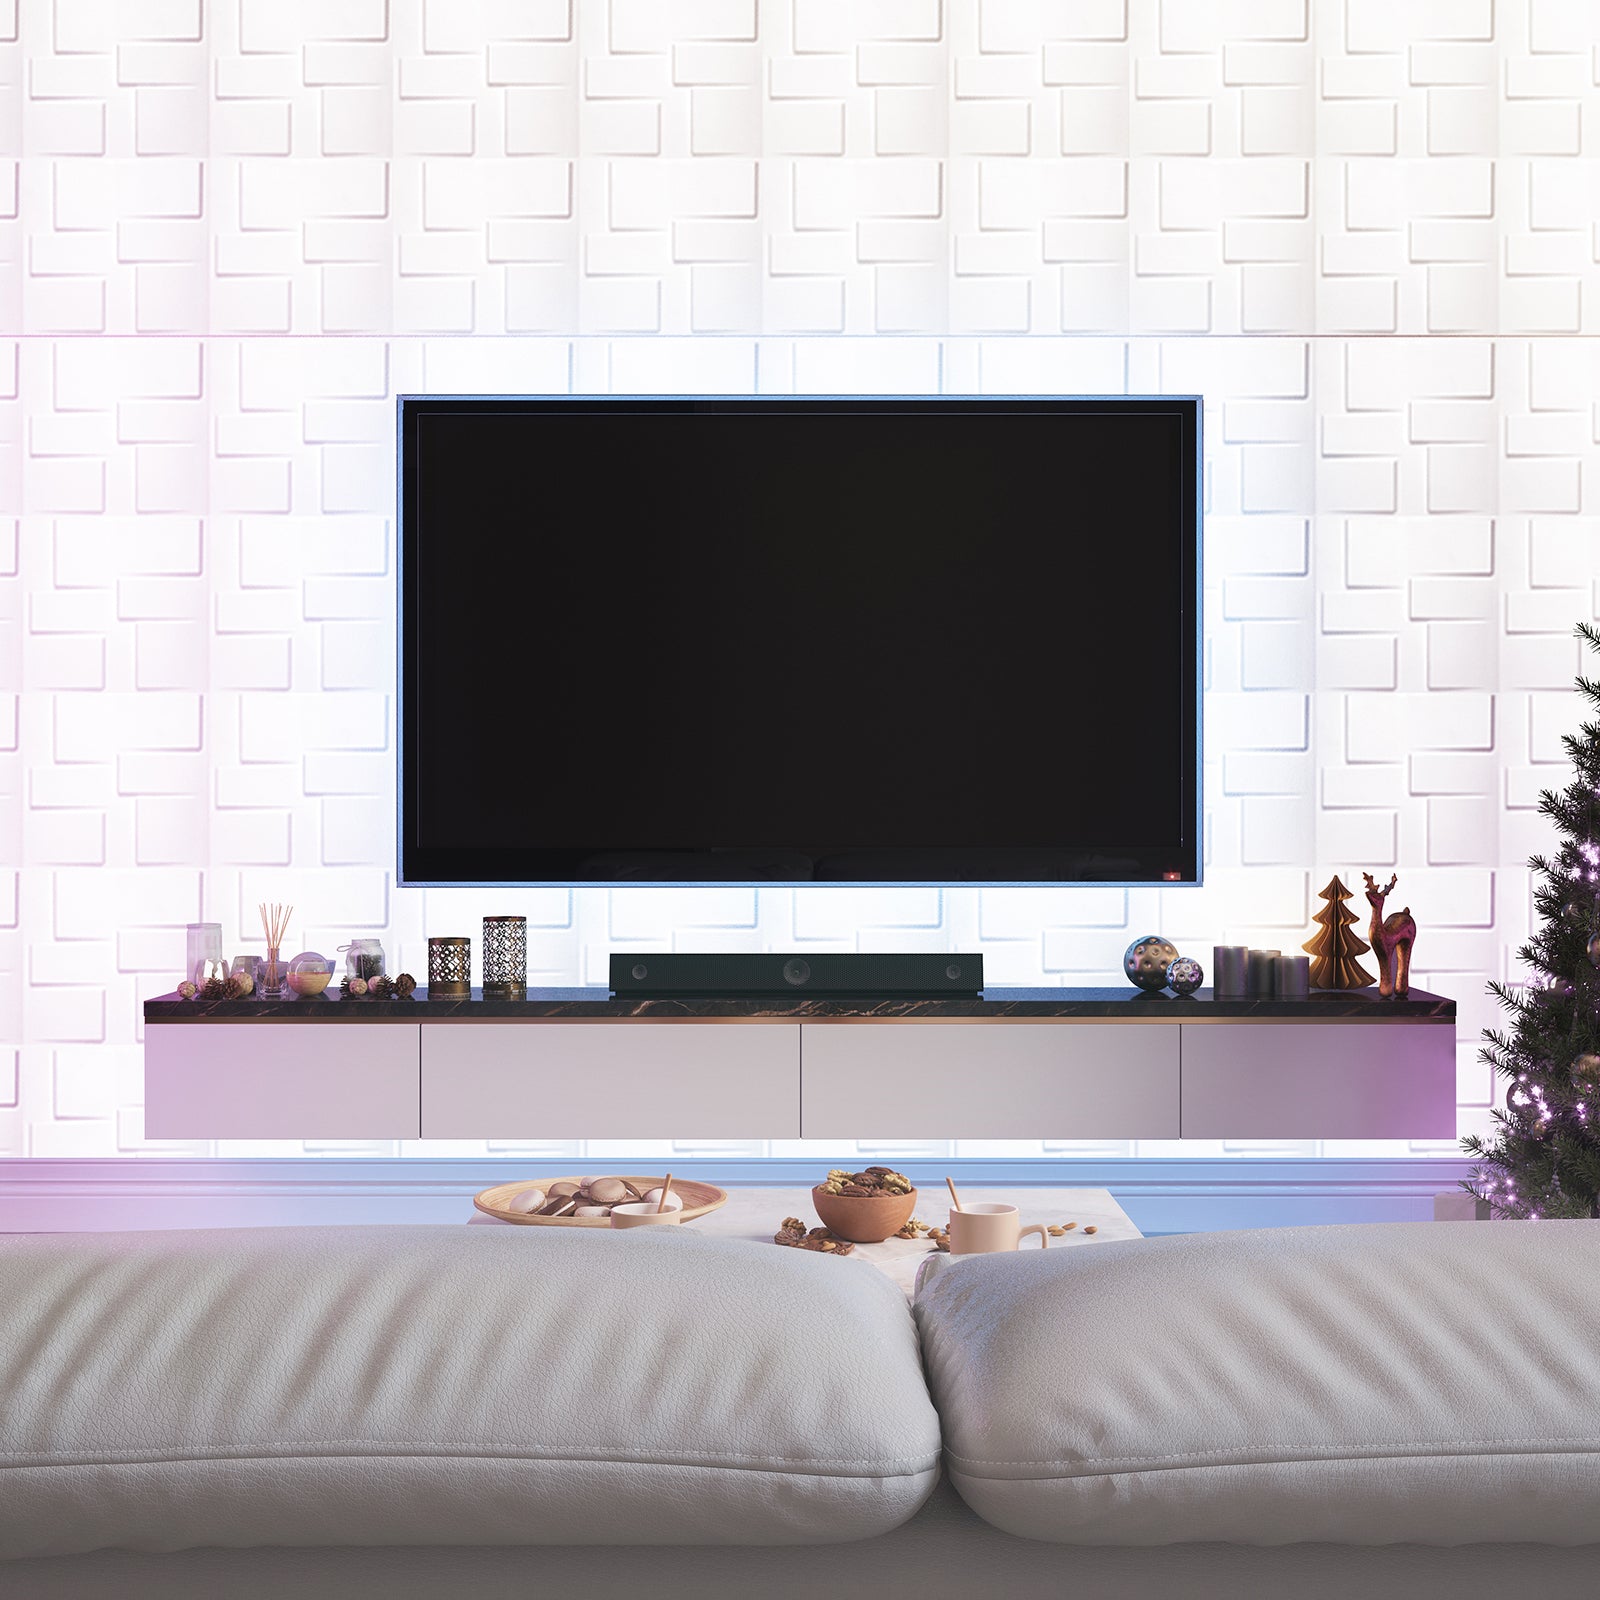 3d wall panels stick on living room